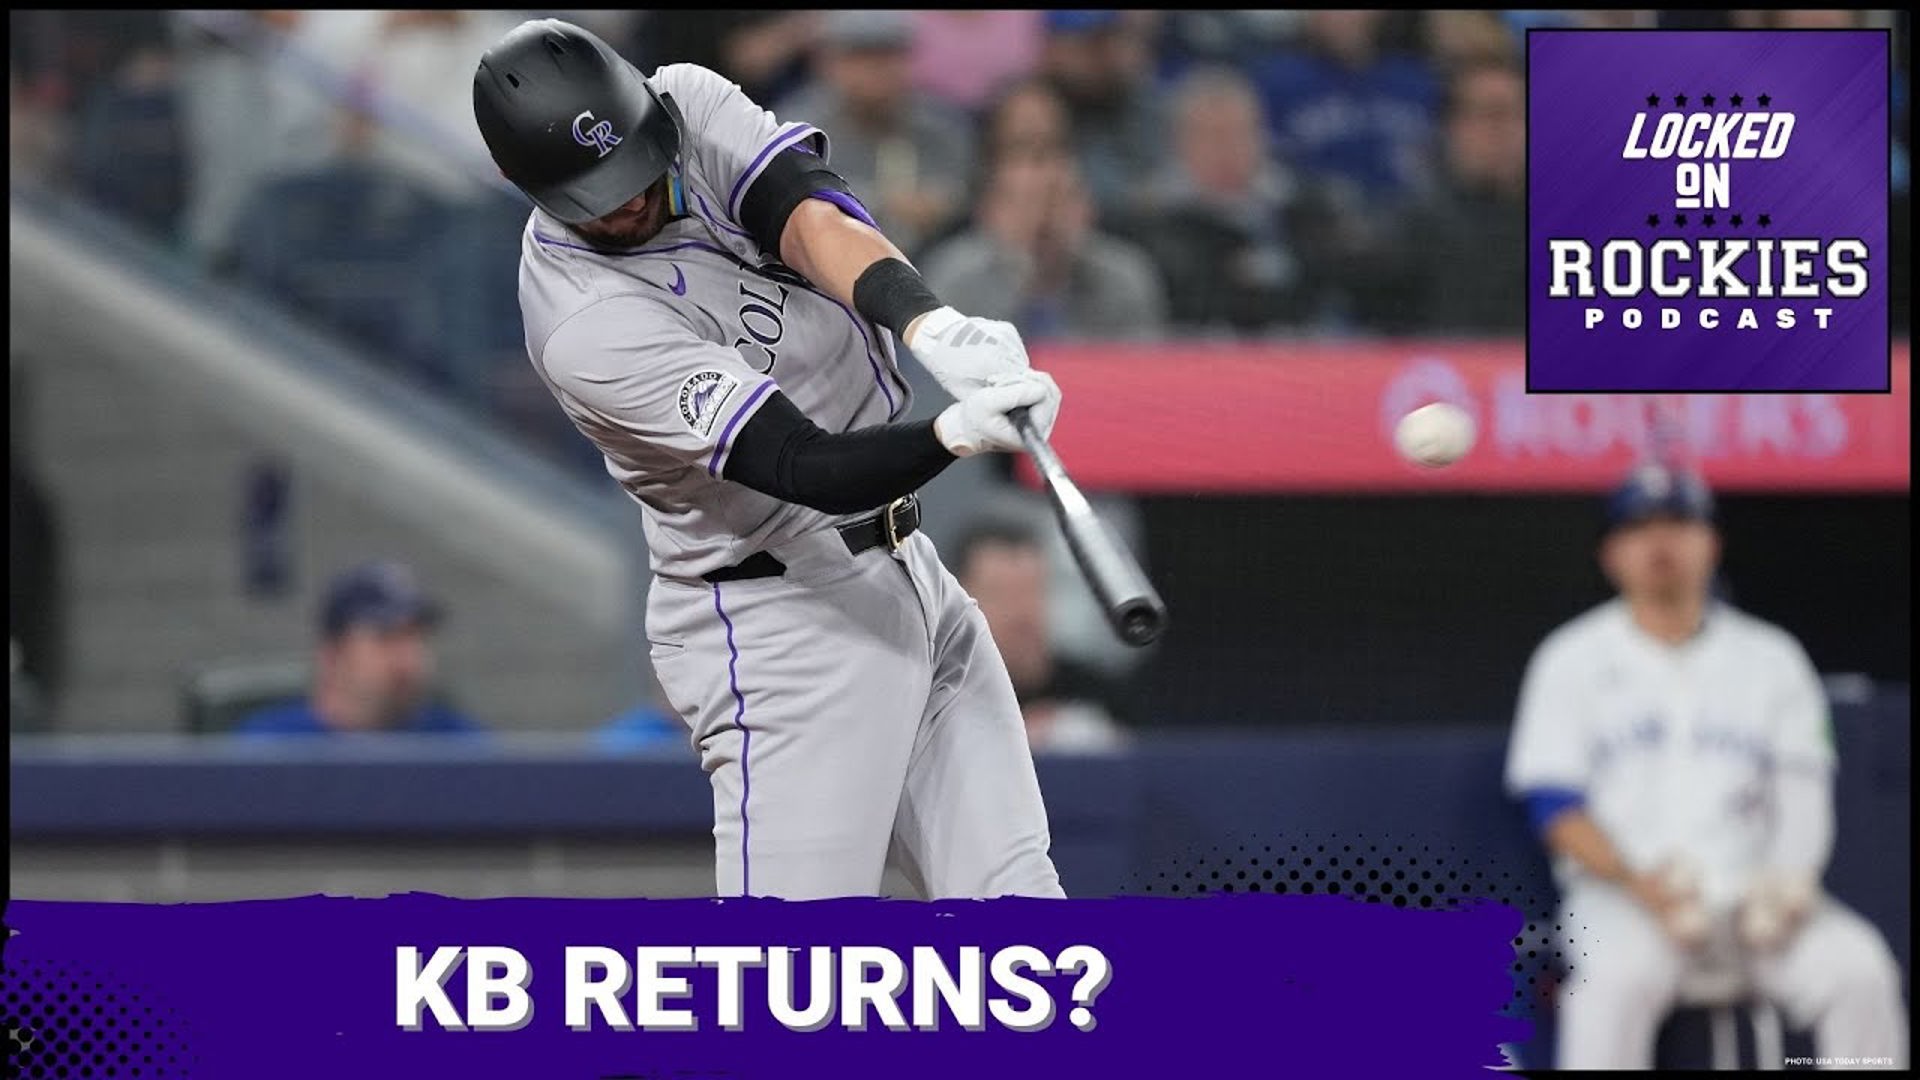 Kris Bryant is looking at a return to the Colorado Rockies. What does that mean for the team during their best stretch of the season?